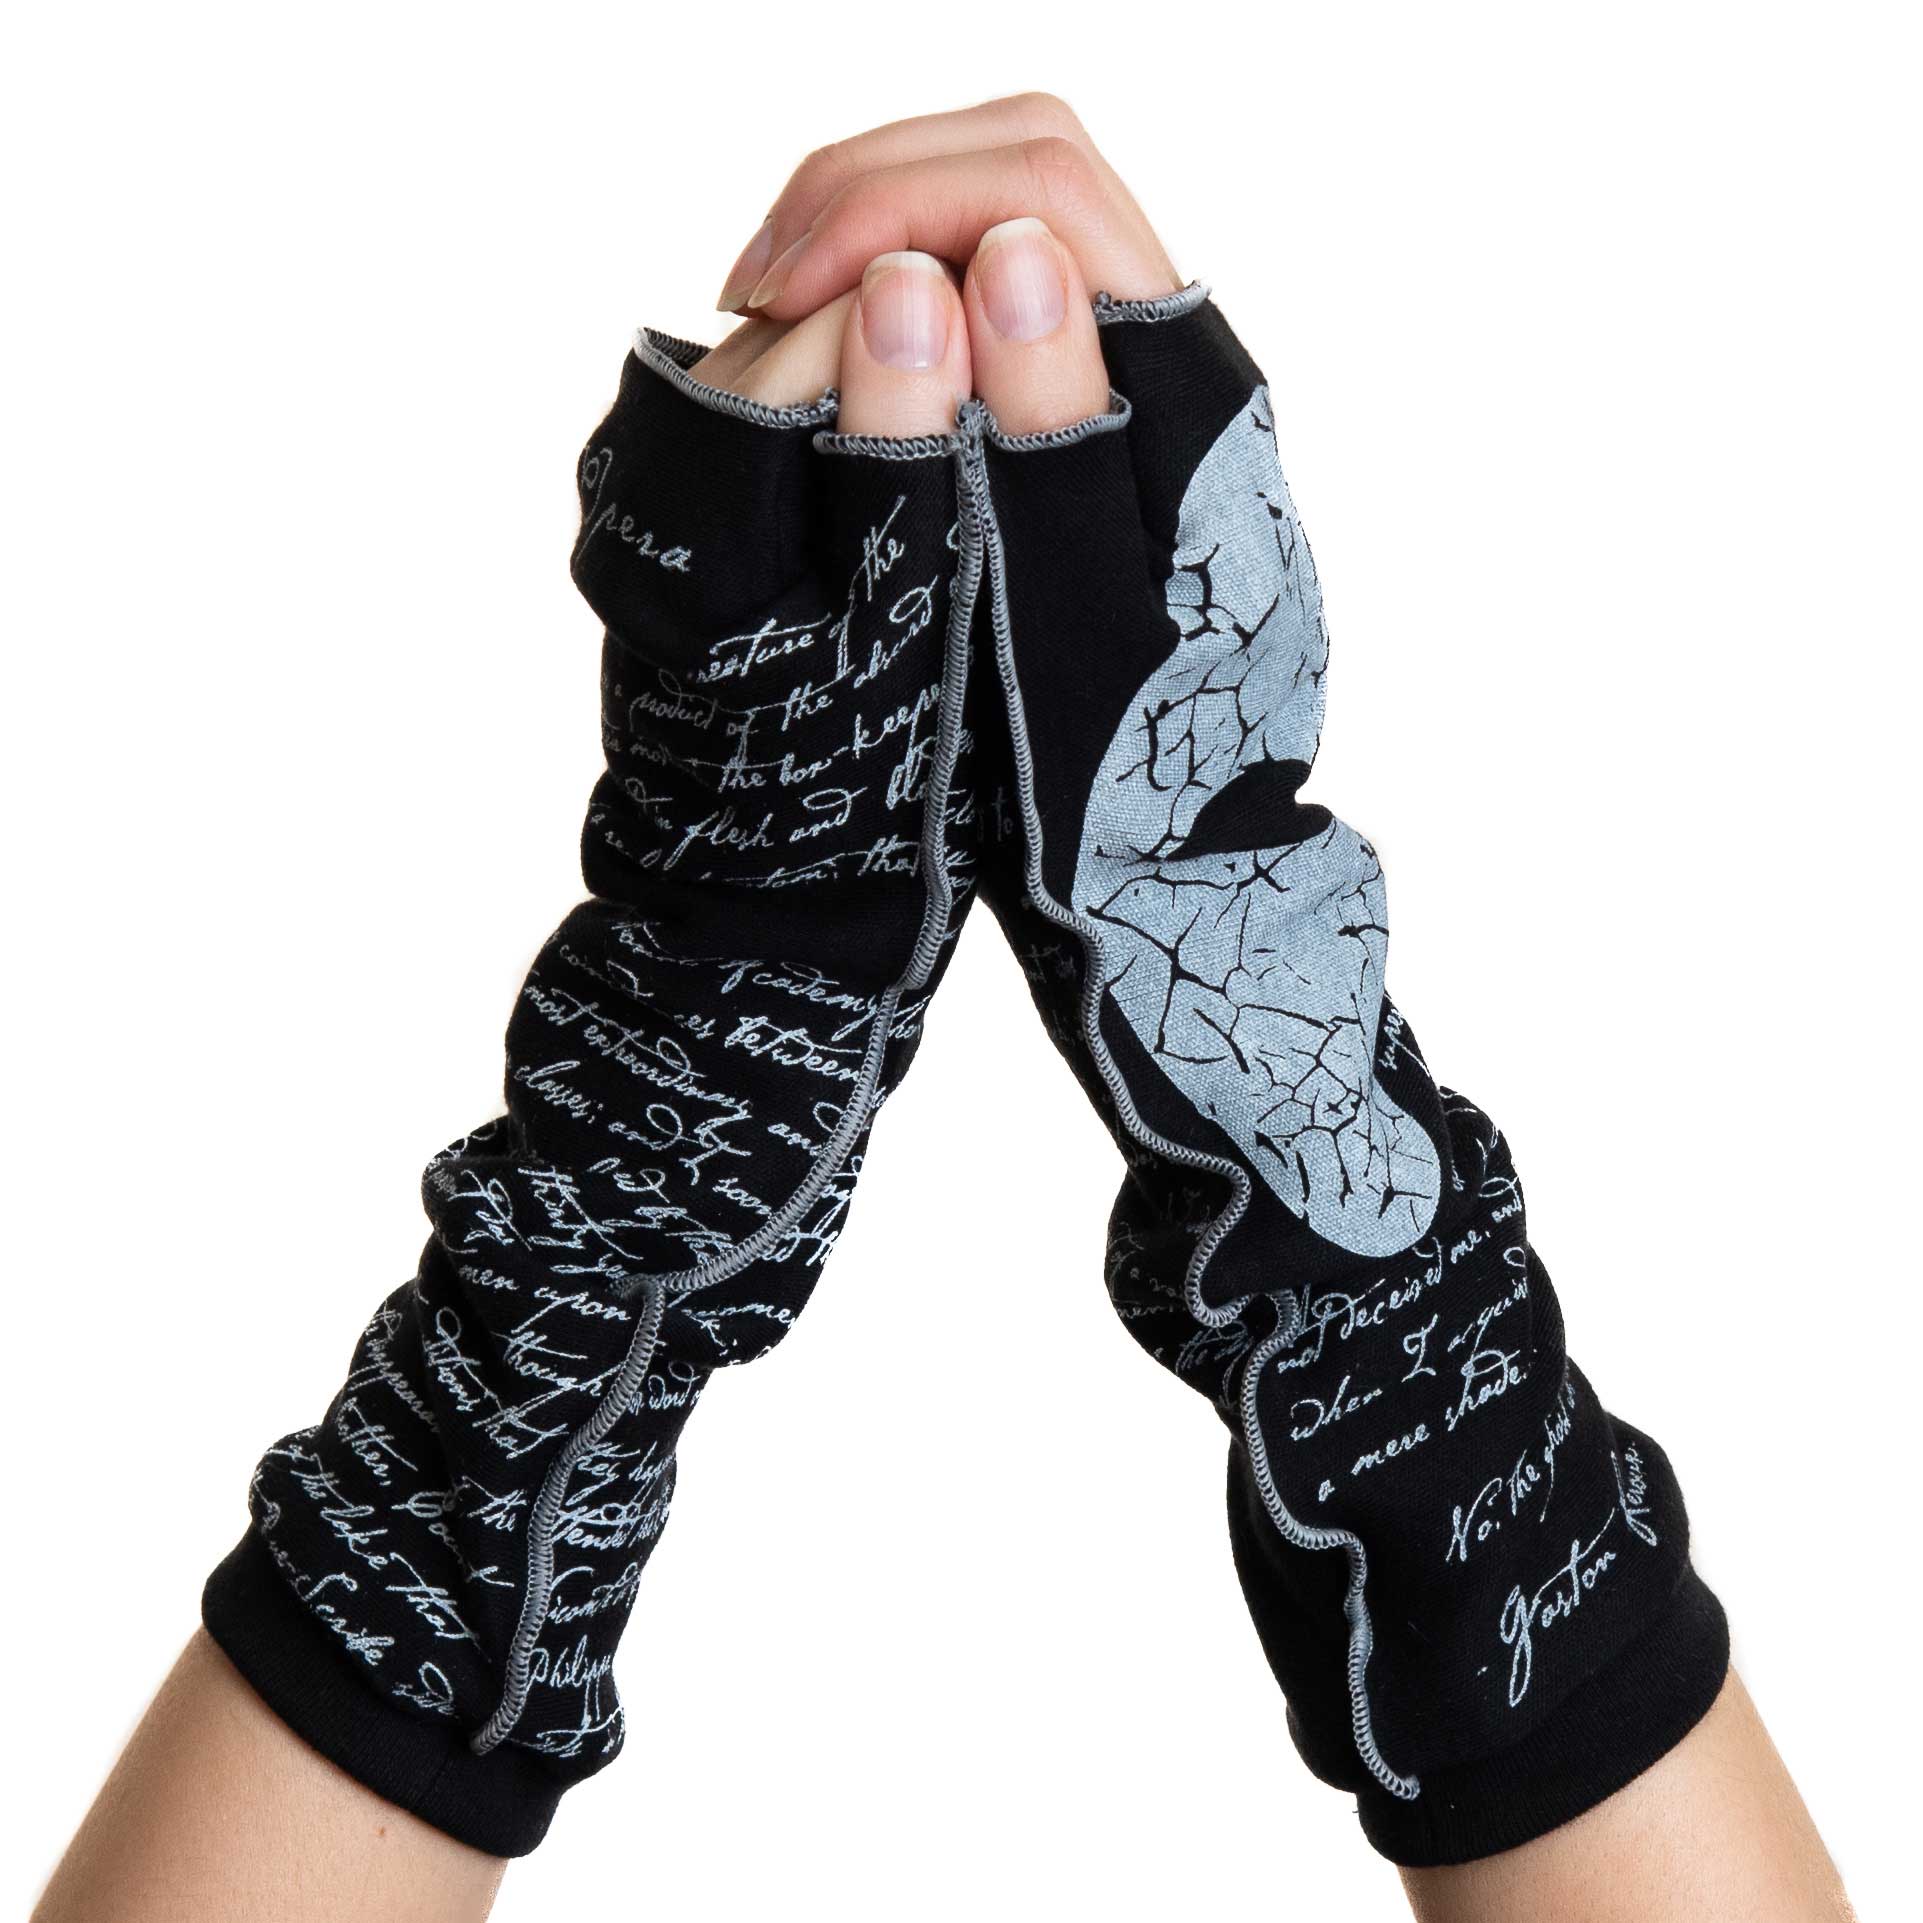 The Raven Writing Gloves